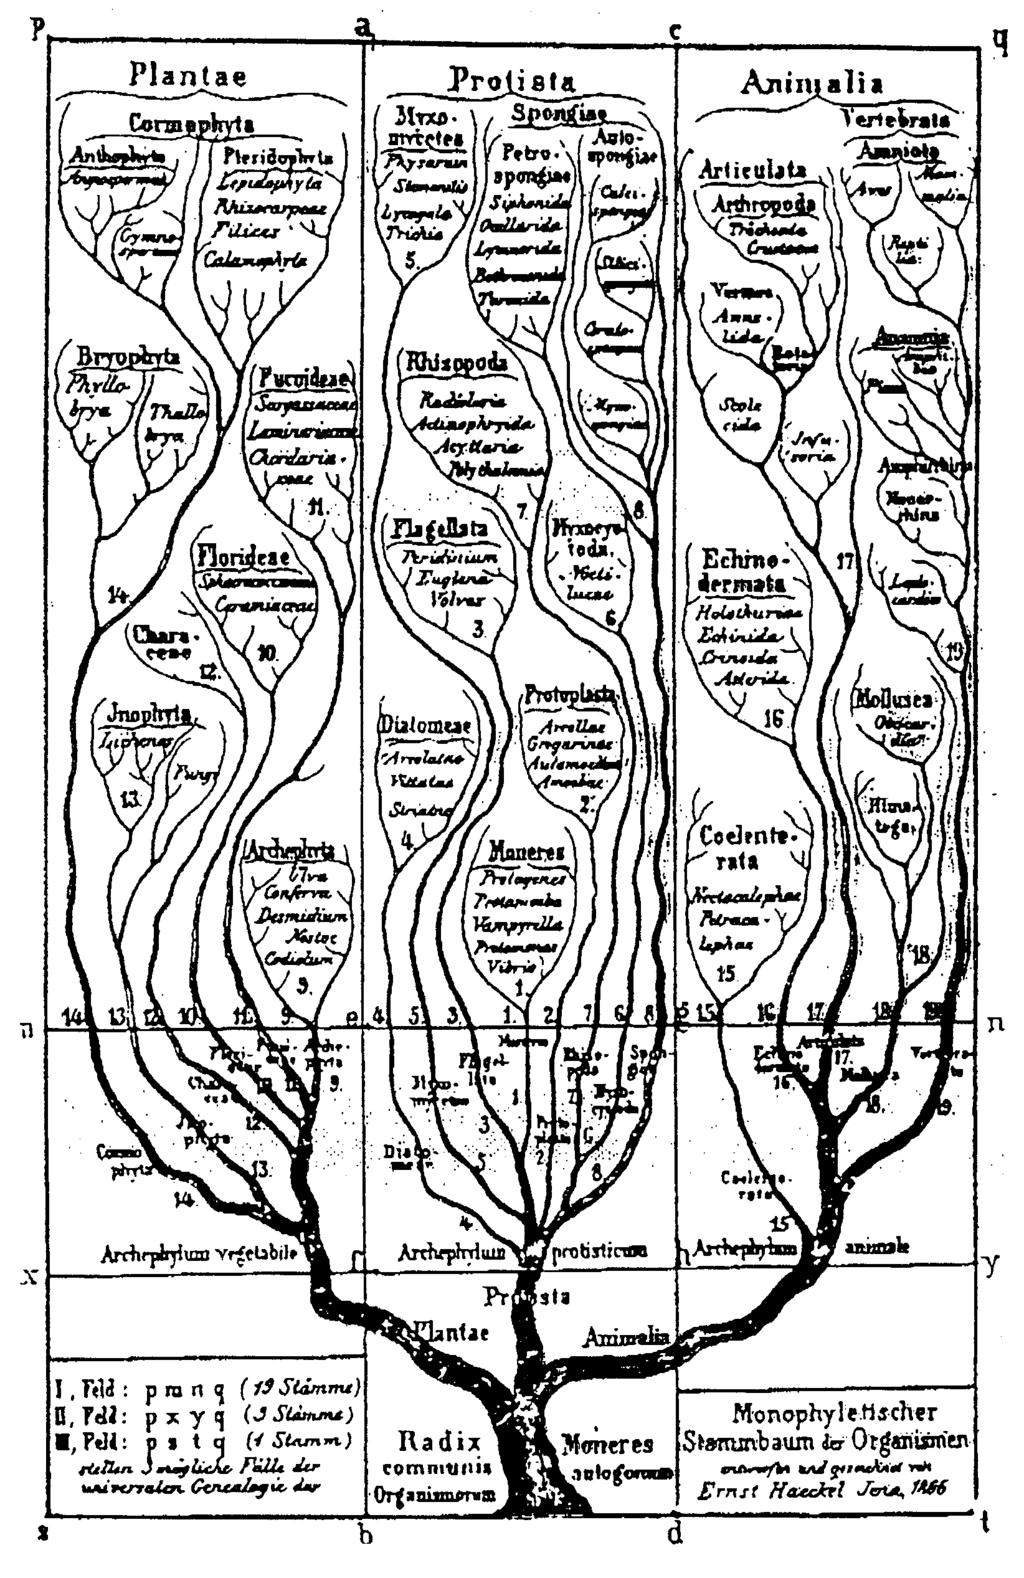 Algorithms in Bioinf. I, WS 03/4, Uni Tübingen, Daniel Huson, WS 2003/4 125 9 Phylogeny Sources for parts of this Chapter: Evolutionary tree of organisms Ernst Haeckel, 1866 R. Durbin, S. Eddy, A.